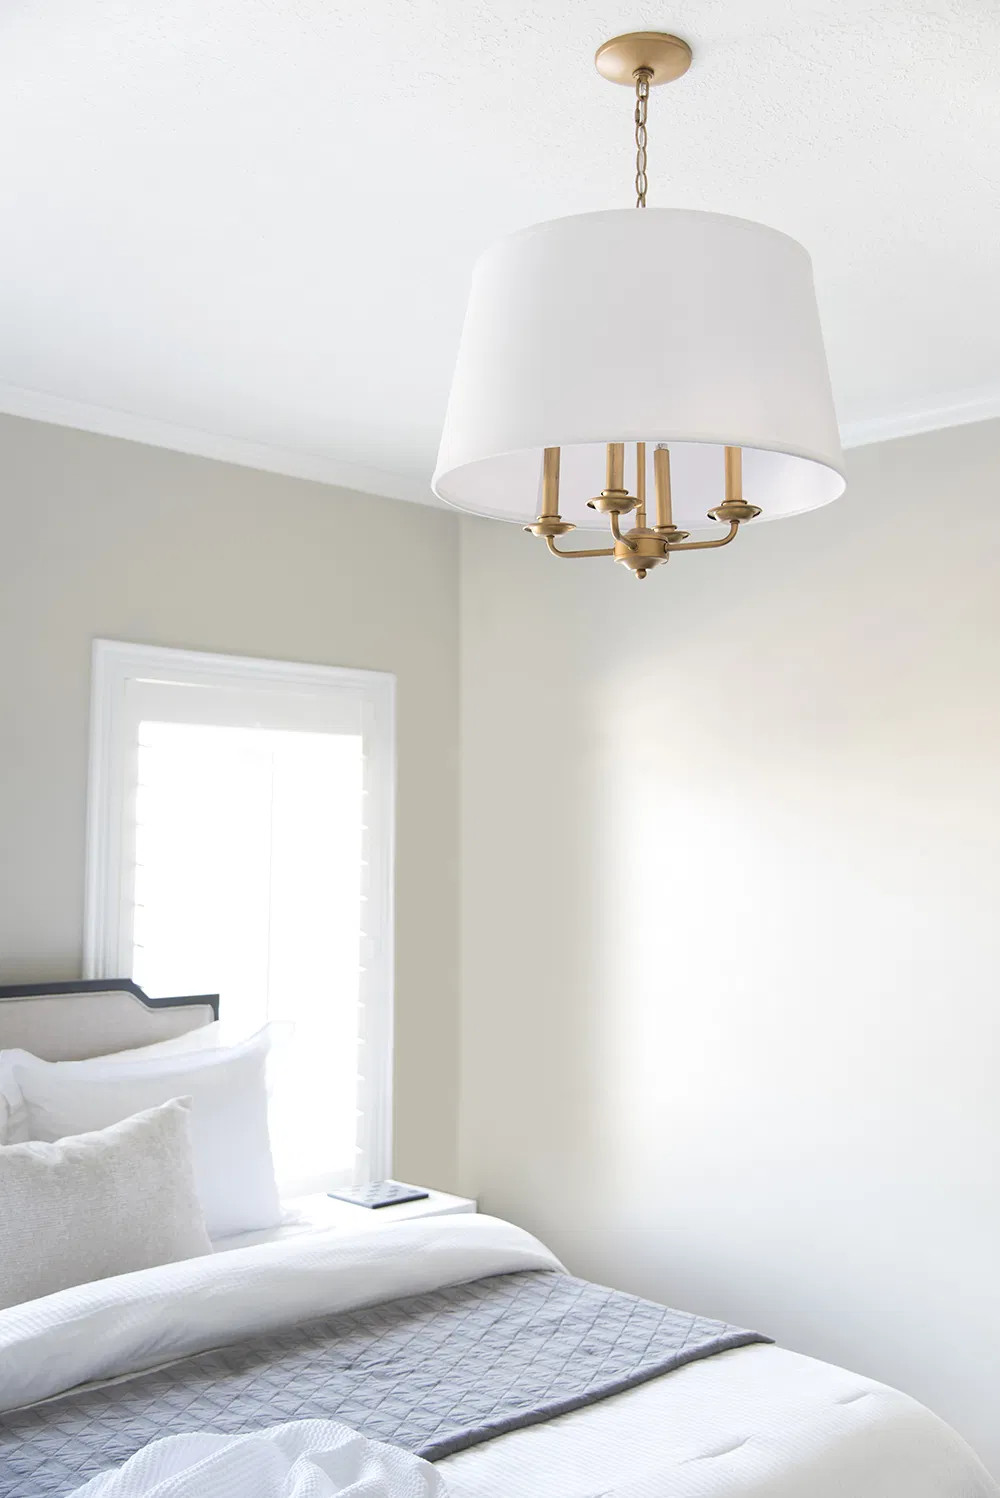 Lowes Bedroom Lighting
 Swapping Our Builder Grade Lights The Best Fixtures From